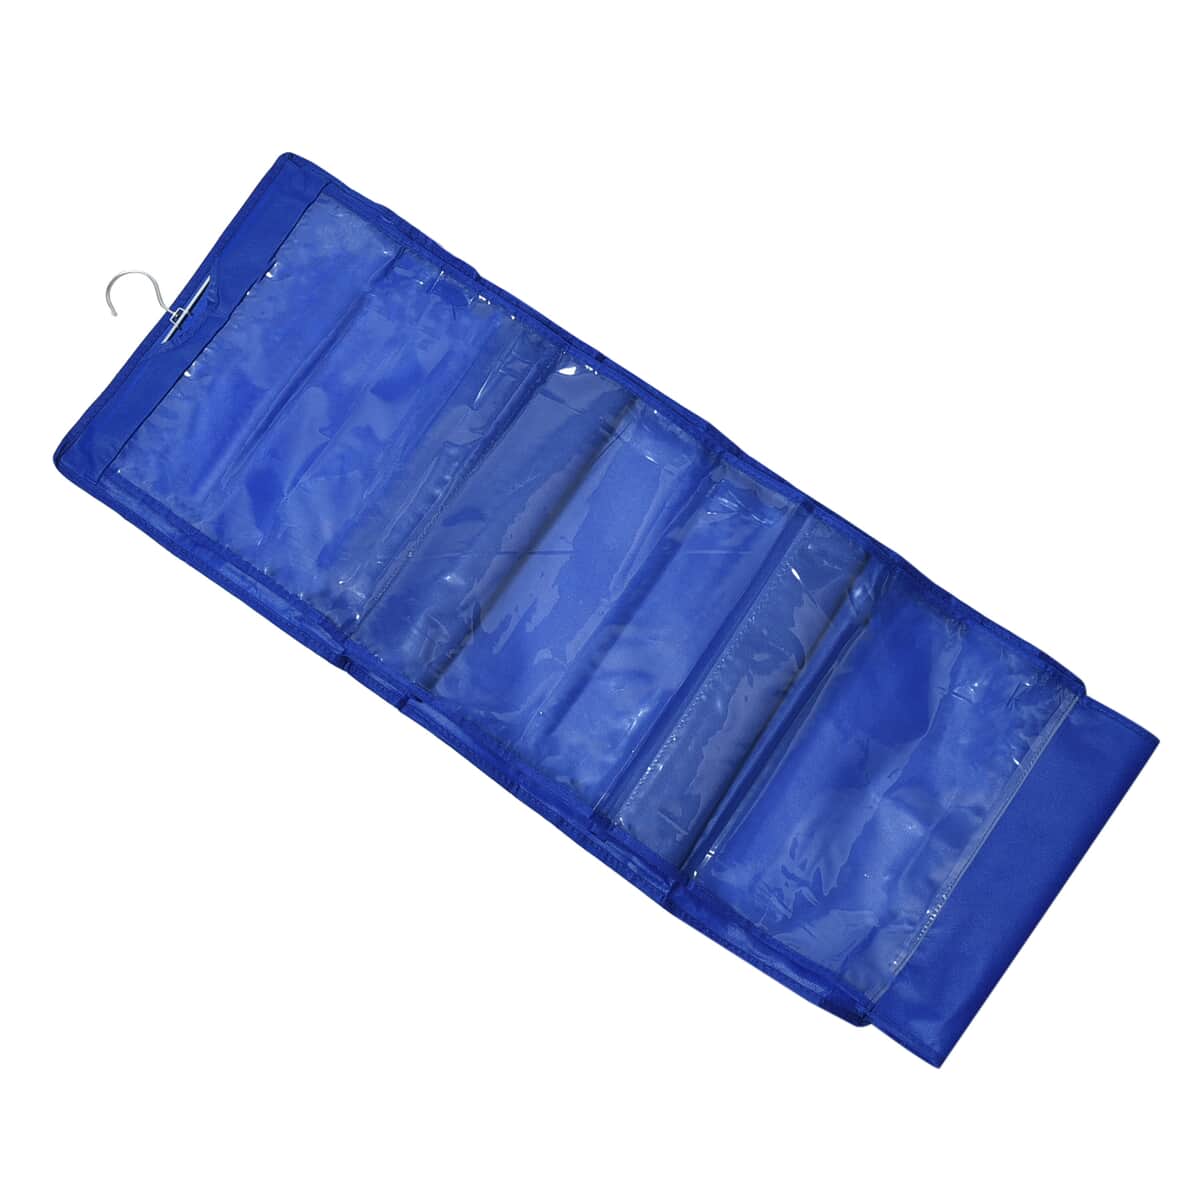 Set of 3 Orange, Dark Blue and Pink Non-Woven Hanging Storage Bag wih Large Clear Window (12.8"x31") image number 6